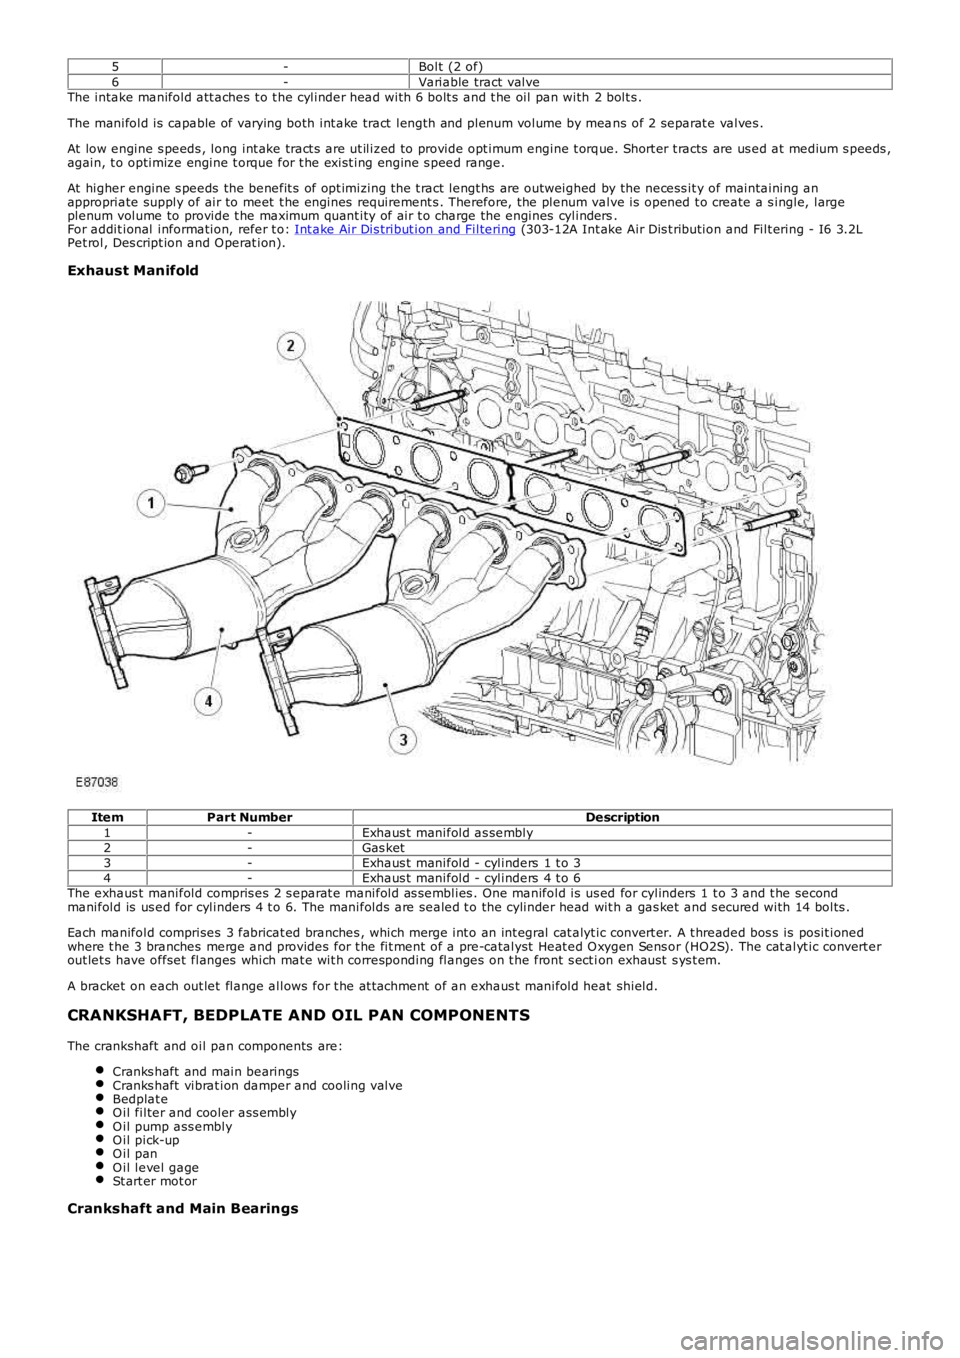 LAND ROVER FRELANDER 2 2006  Repair Manual 5-Bolt (2 of)6-Variable tract valveThe intake manifold att aches t o t he cylinder head wit h 6 bolt s  and t he oil pan with 2 bolt s .
The manifold is  capable of varying both int ake tract  length 